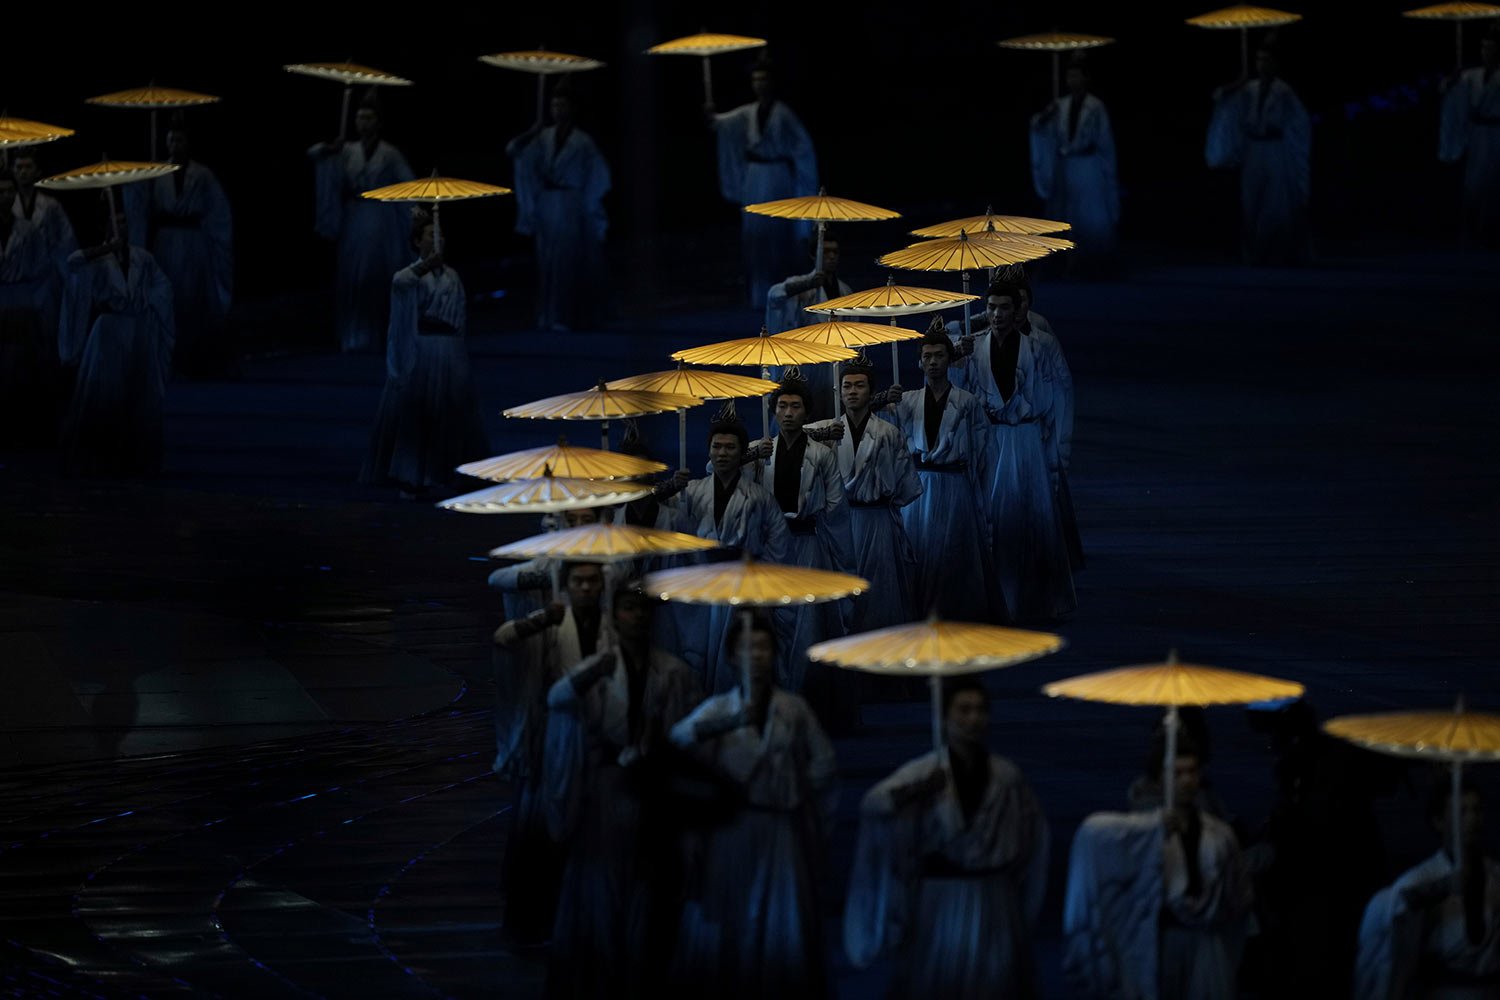  Artists perform during the opening ceremony of the 19th Asian Games in Hangzhou, China, Saturday, Sept. 23, 2023. (AP Photo/Dita Alangkara) 